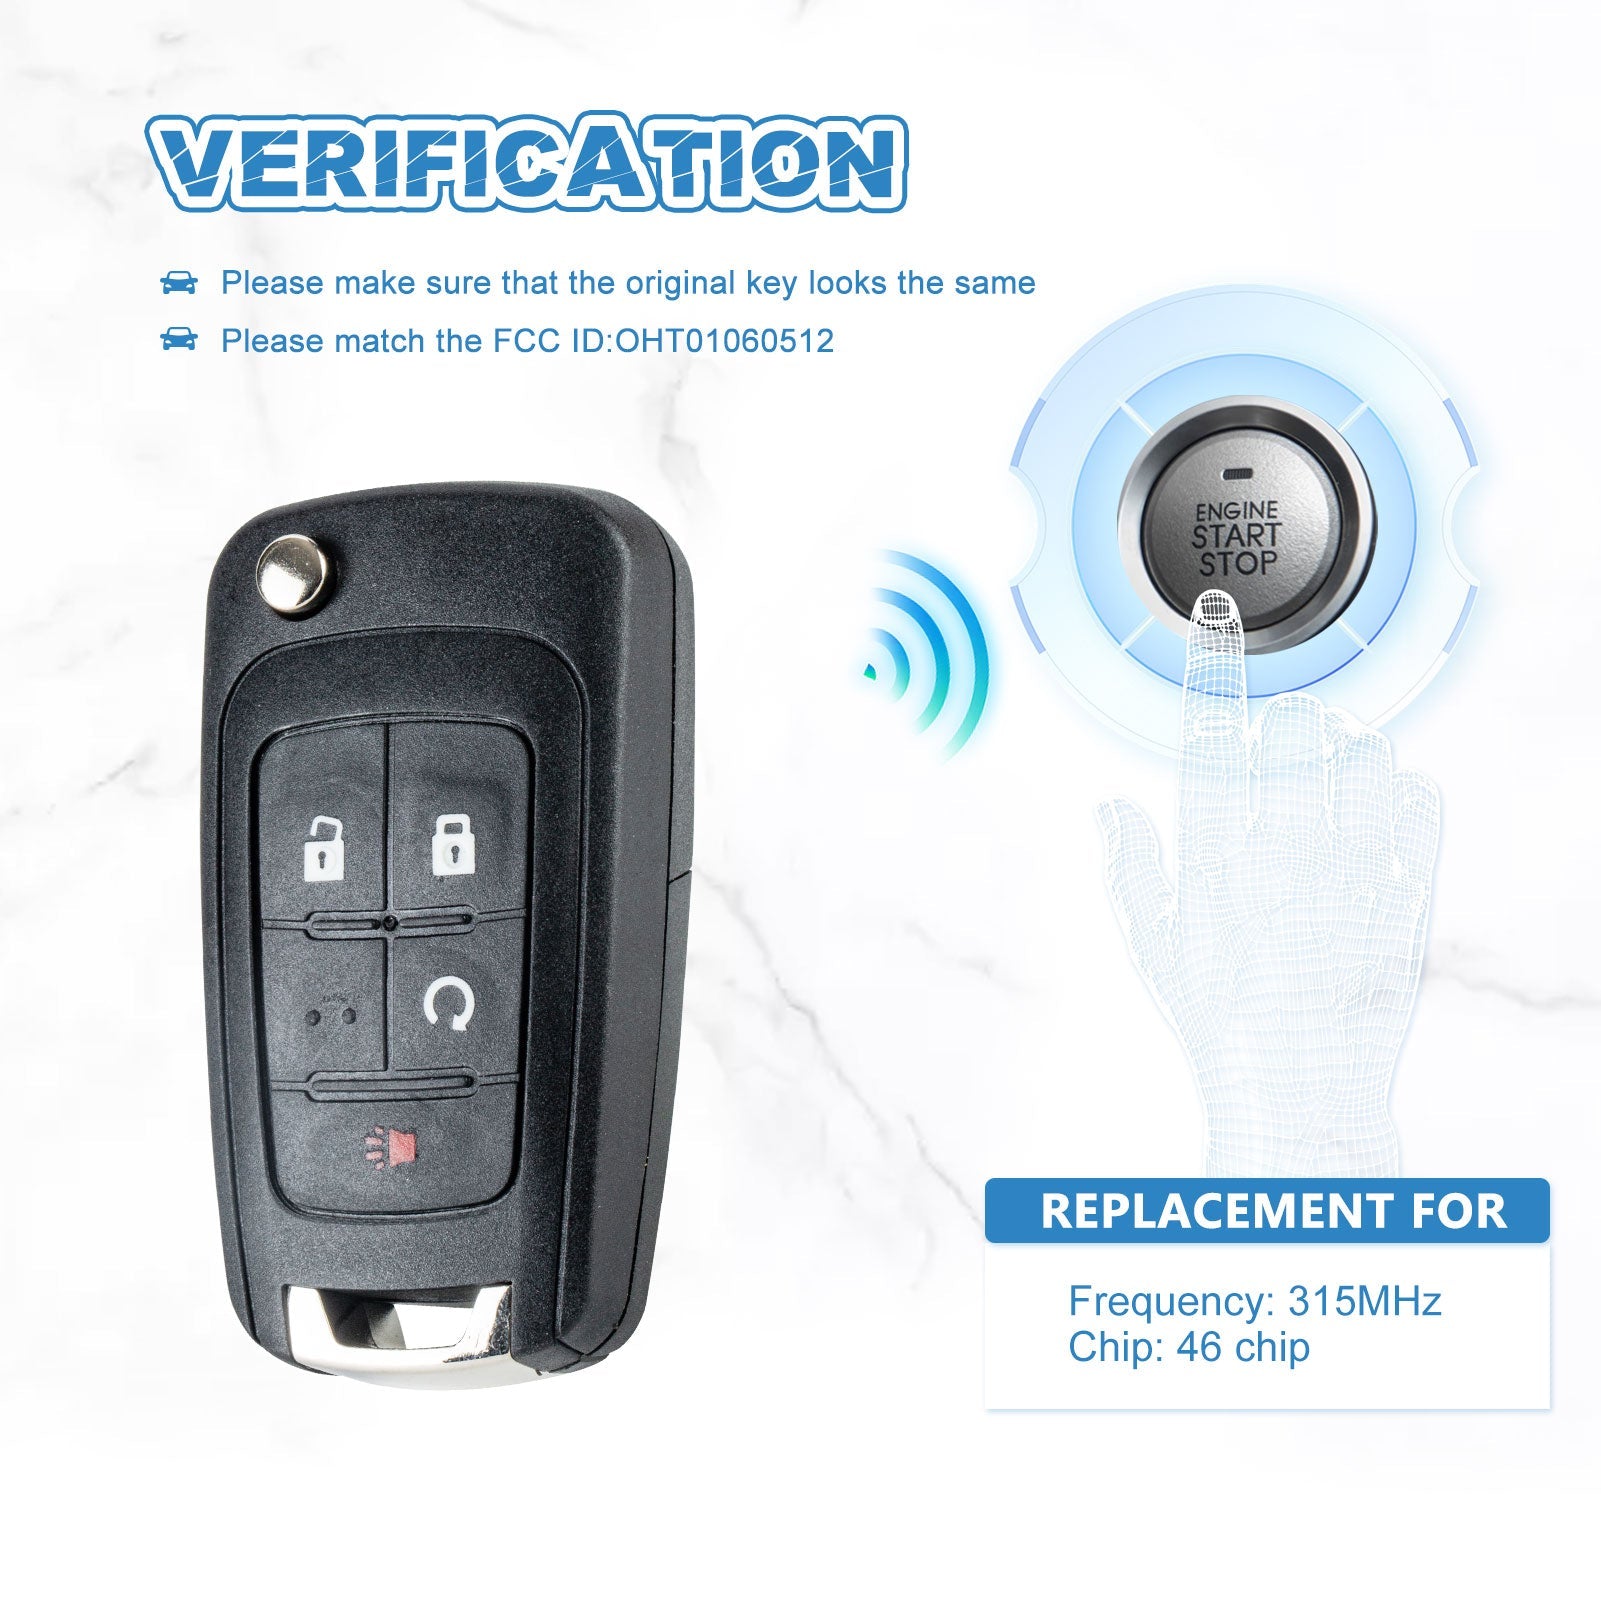 Car Key Fob Keyless Entry Remote Control 315MHZ Replacememnt for 2010-2019 Equinox 2014-2018 Buick Encore 2010-2019 GMC Terrain OHT01060512 KR-C4SC-05